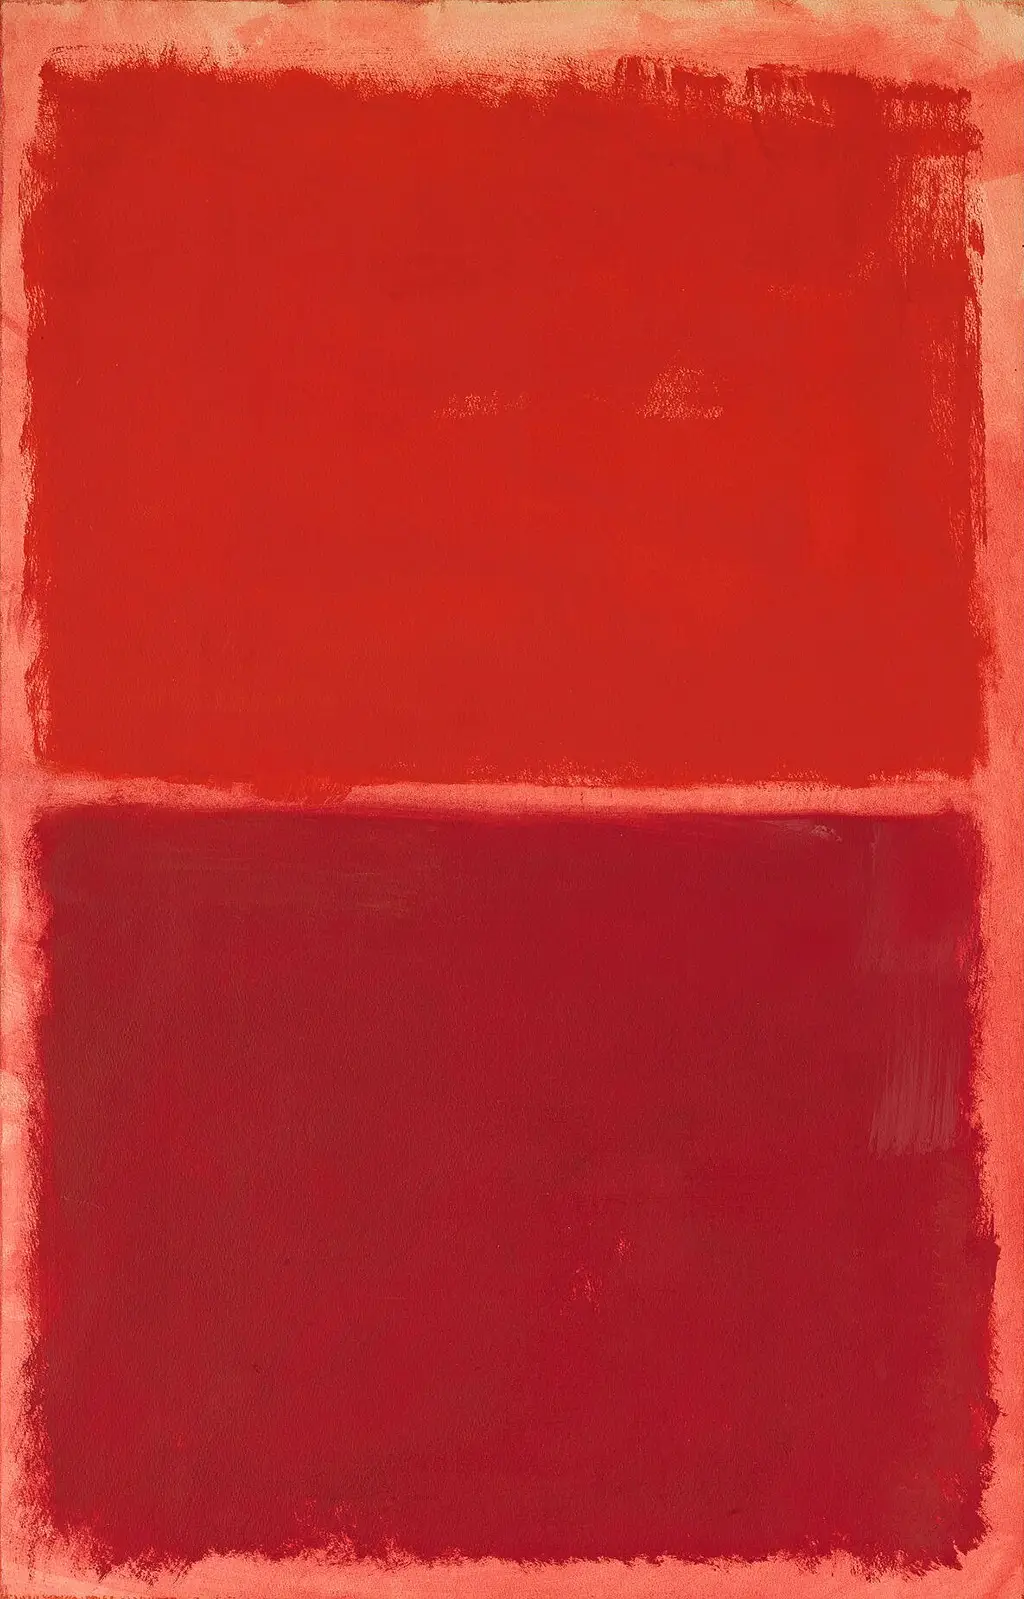 Untitled (Red) in Detail Mark Rothko